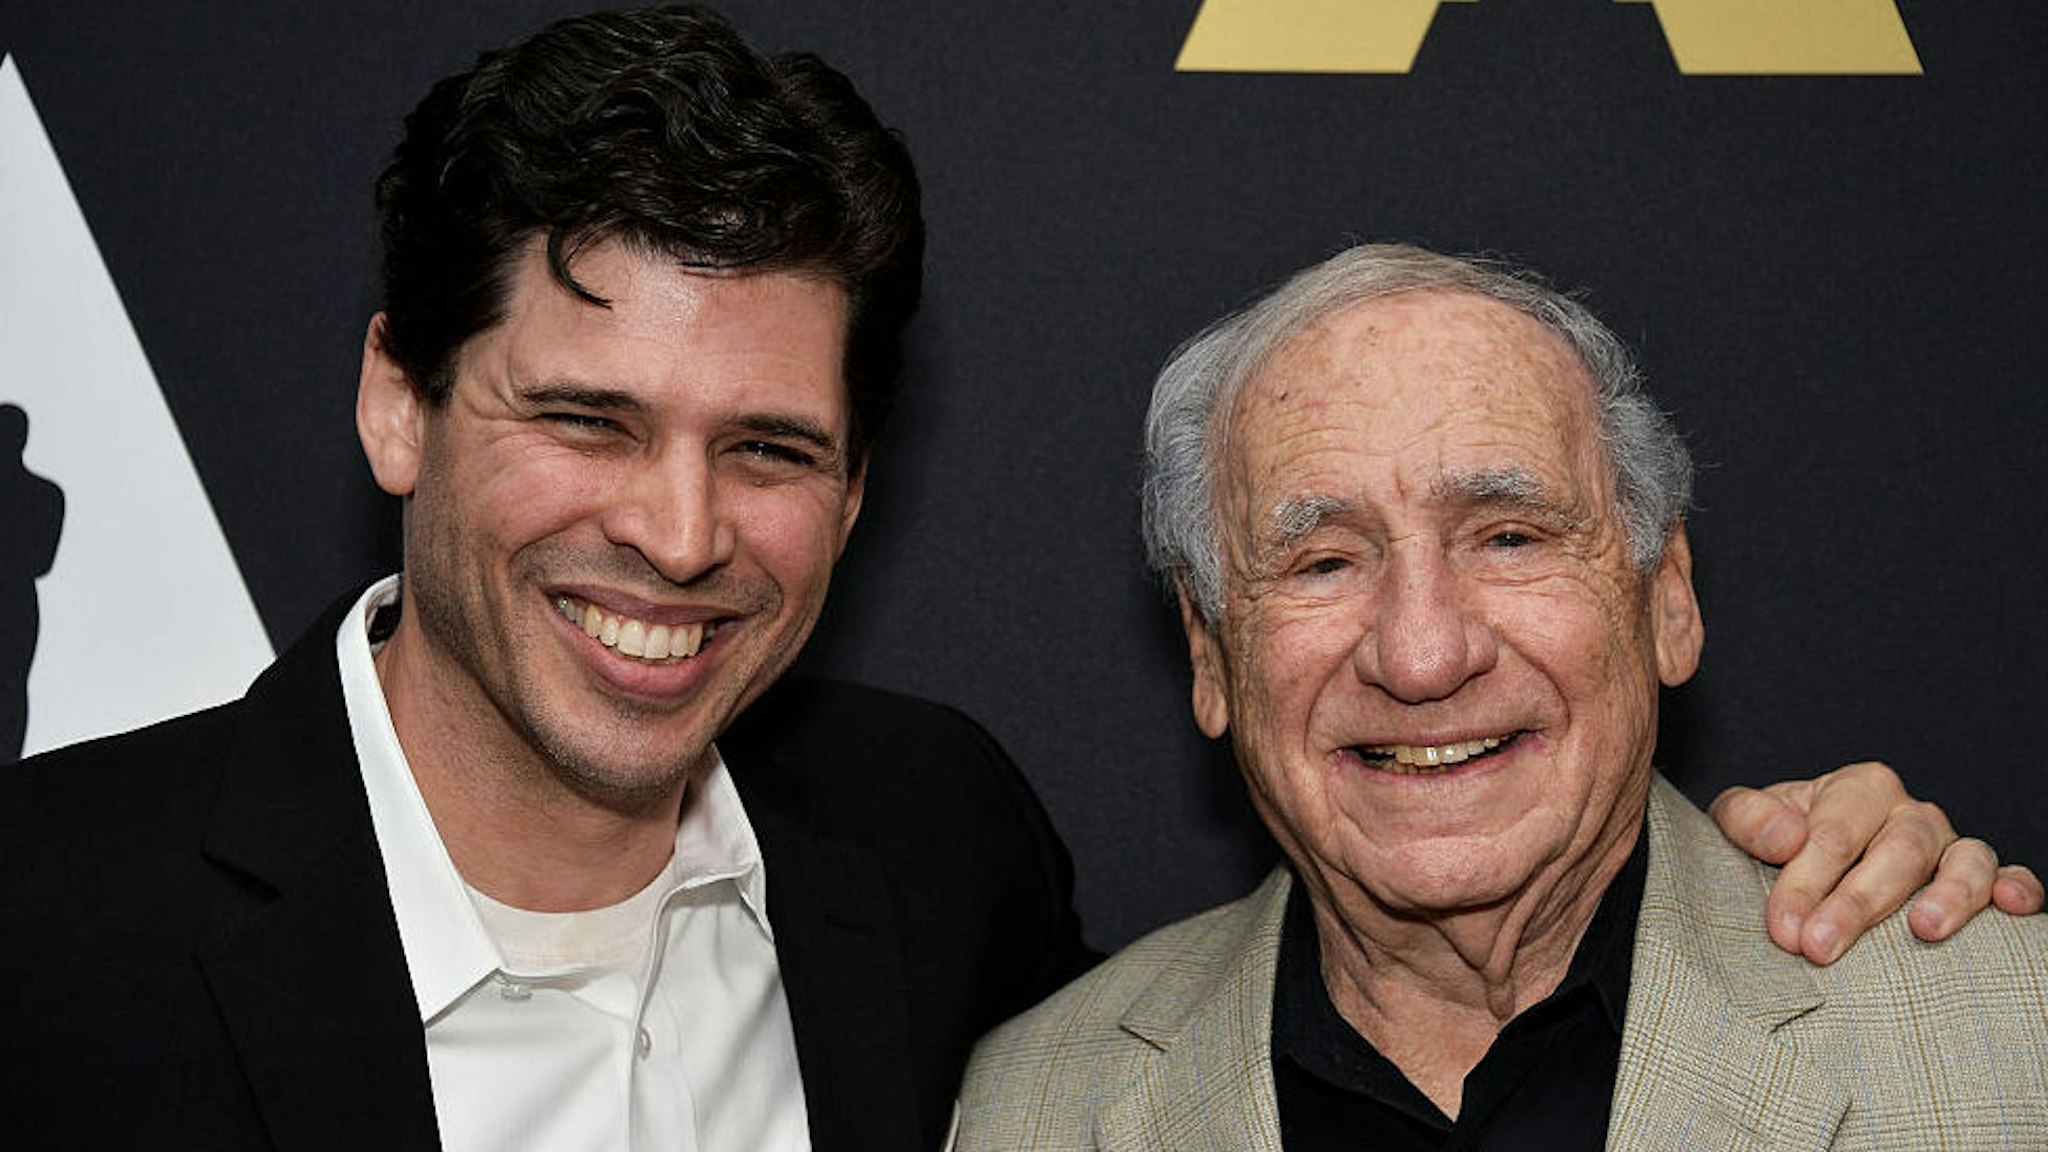 Author Max Brooks (L) and his father, actor Mel Brooks attend The Academy's 20th Anniversary Screening of "The Shawshank Redemption" at the AMPAS Samuel Goldwyn Theater on November 18, 2014 in Beverly Hills, California.